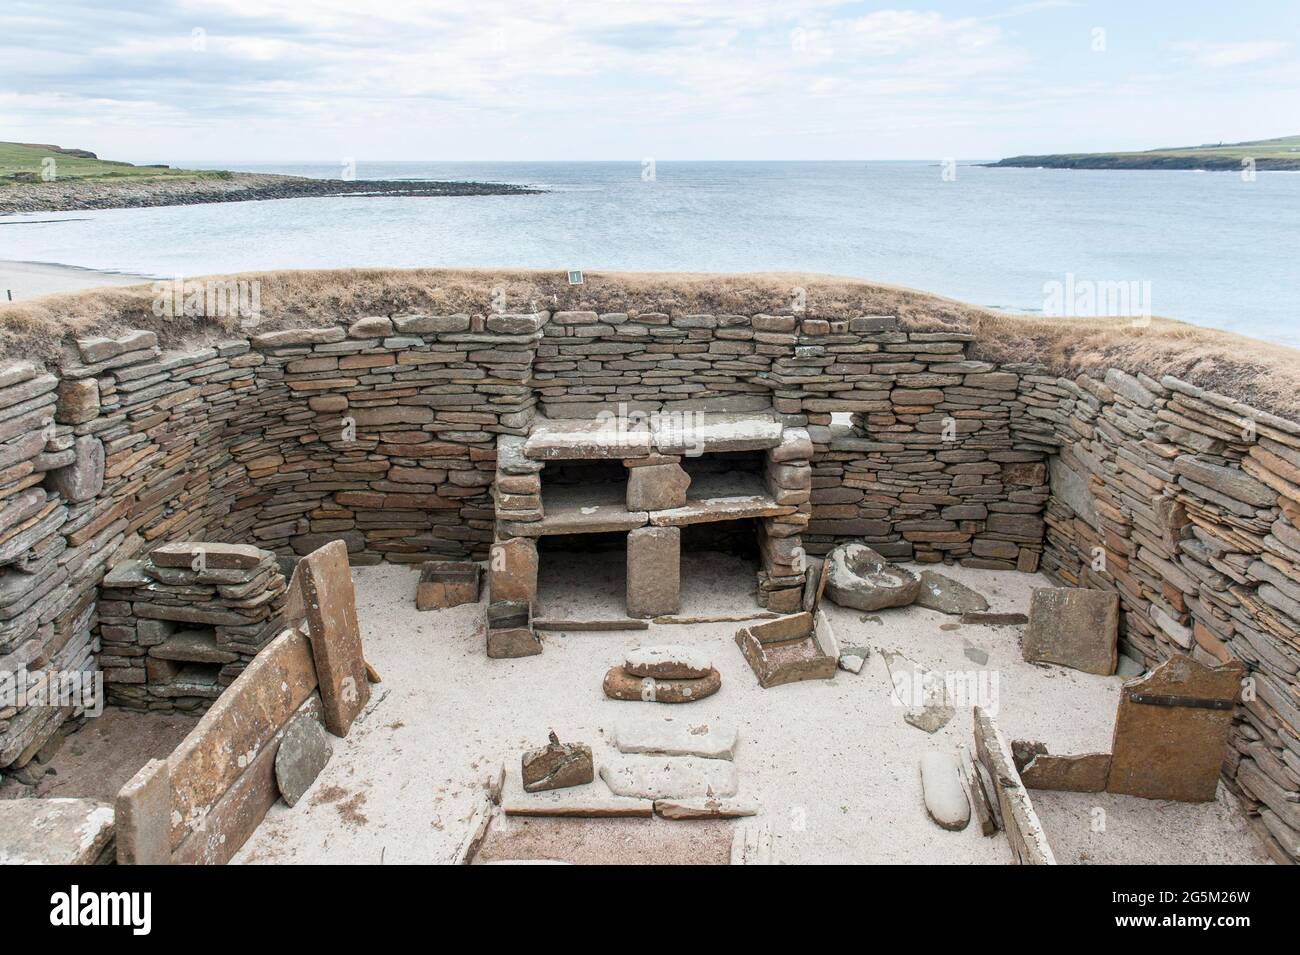 The Heart of Neolithic Orkney, Neolithic settlement, house 7, kitchen with shelves made of stone, Skara Brae, Mainland, Orkney Islands, Scotland, Grea Stock Photo